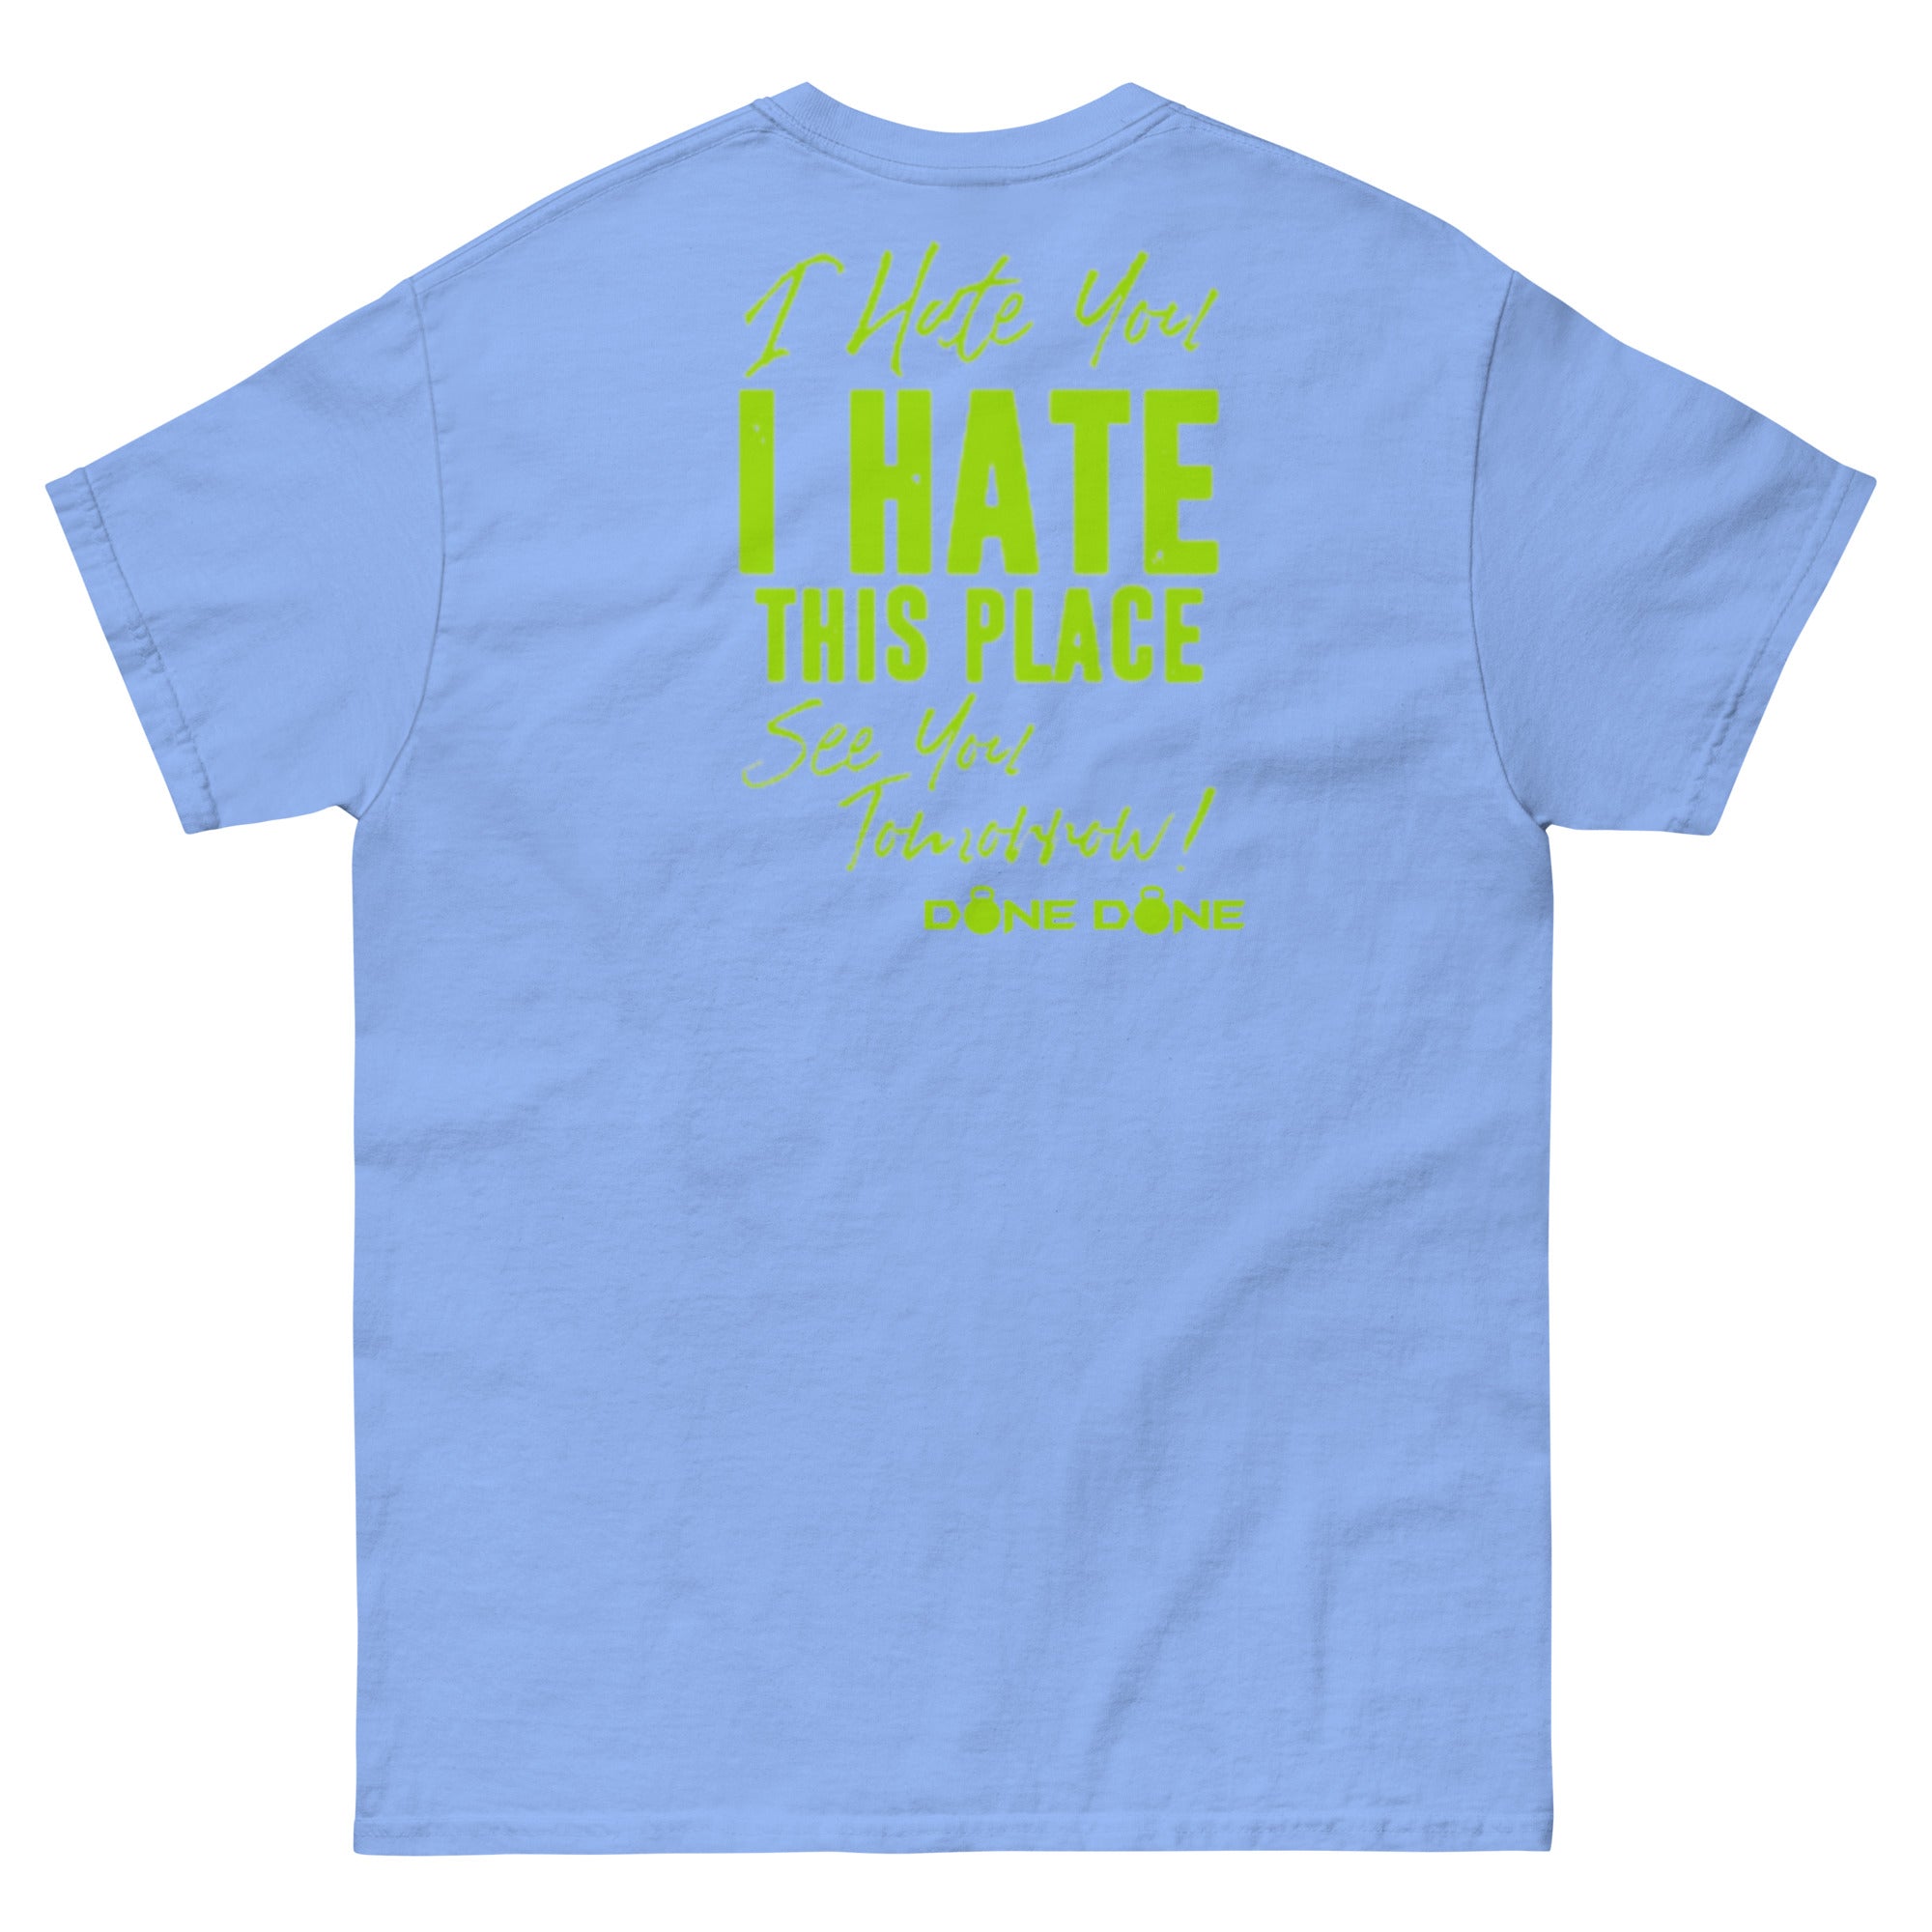 Hate You Hate This Place Unisex tee